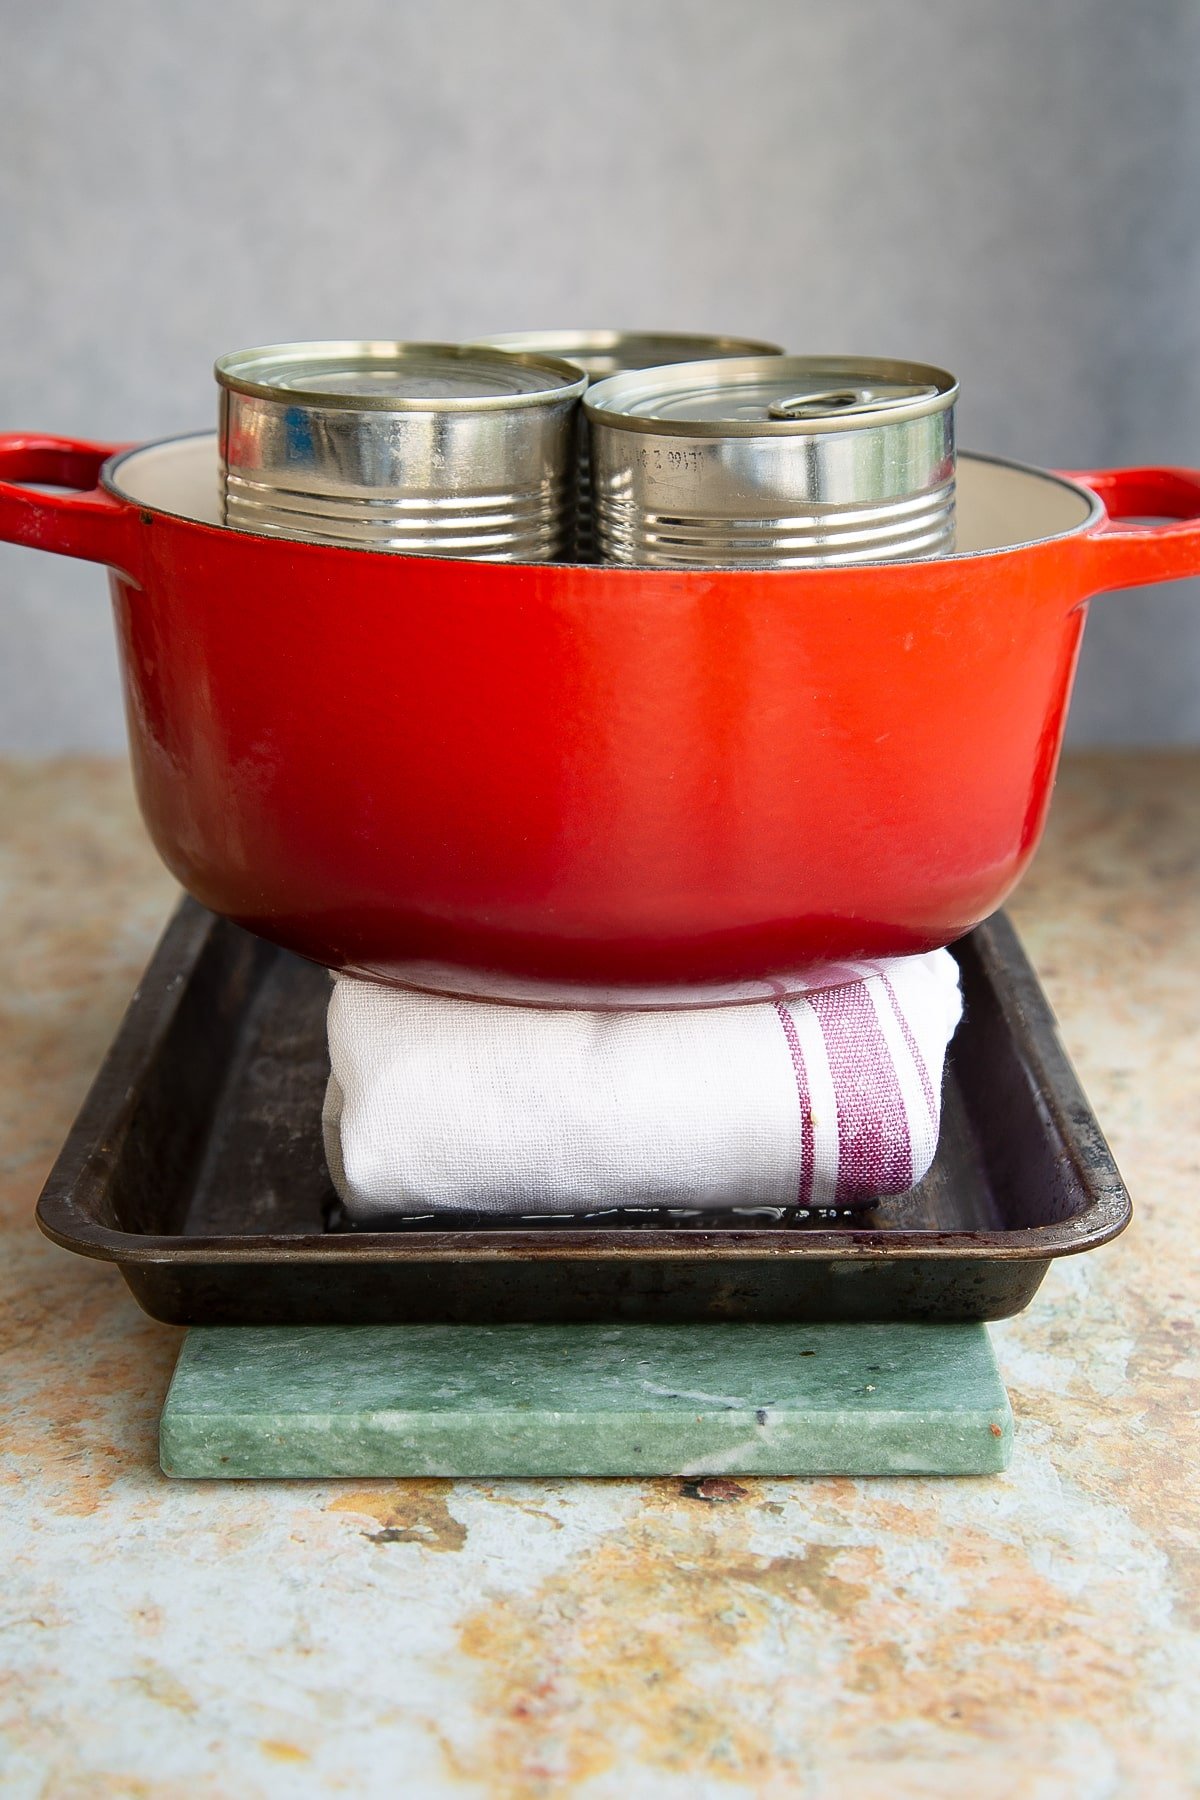 a large red pan with 3 sealed cans in the middle sat on a teatowel and bakind tray